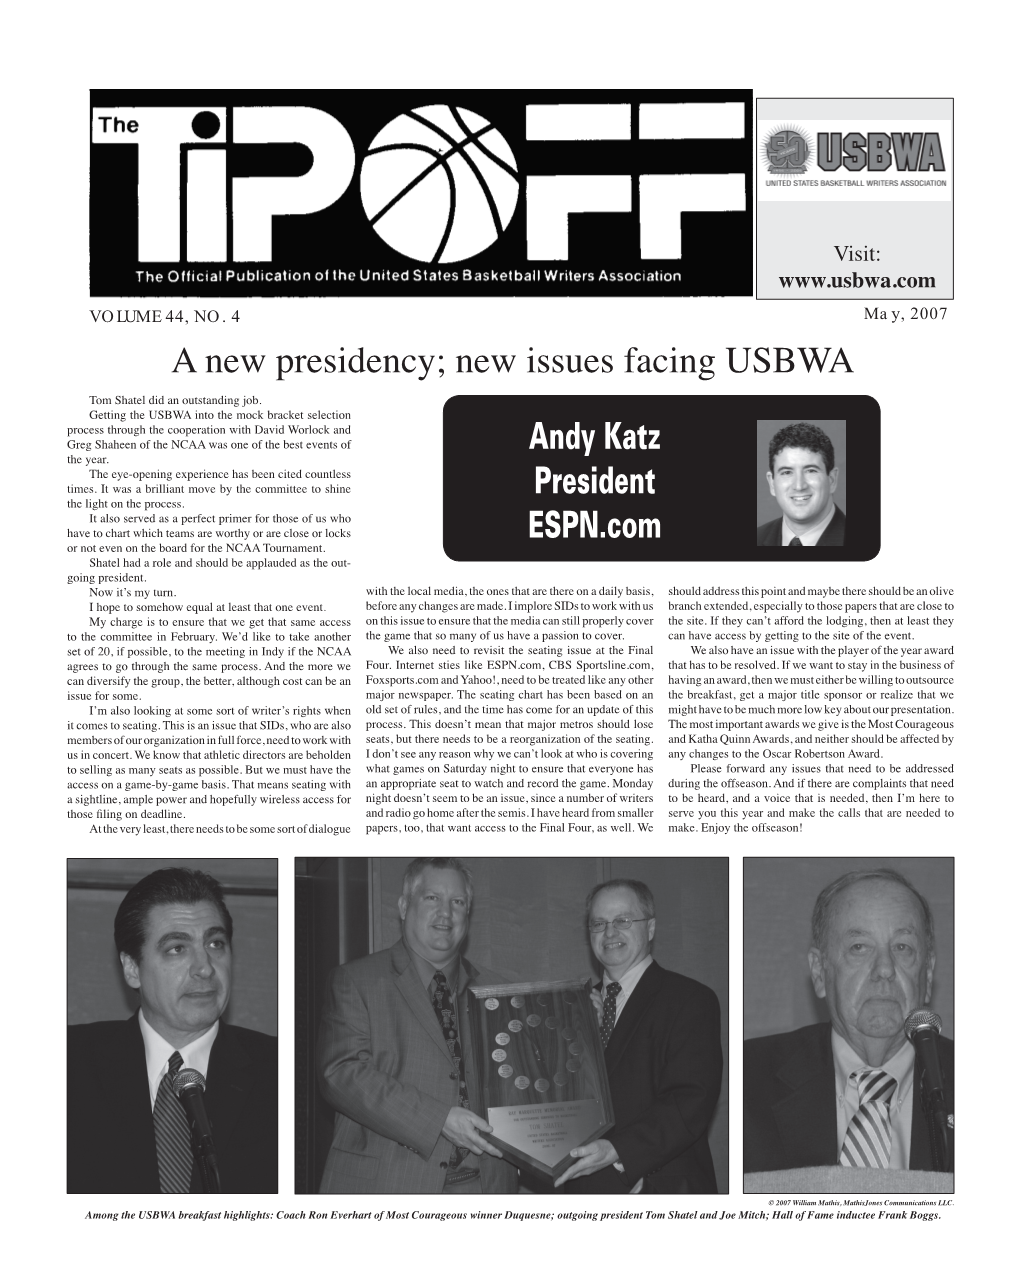 A New Presidency; New Issues Facing USBWA Tom Shatel Did an Outstanding Job